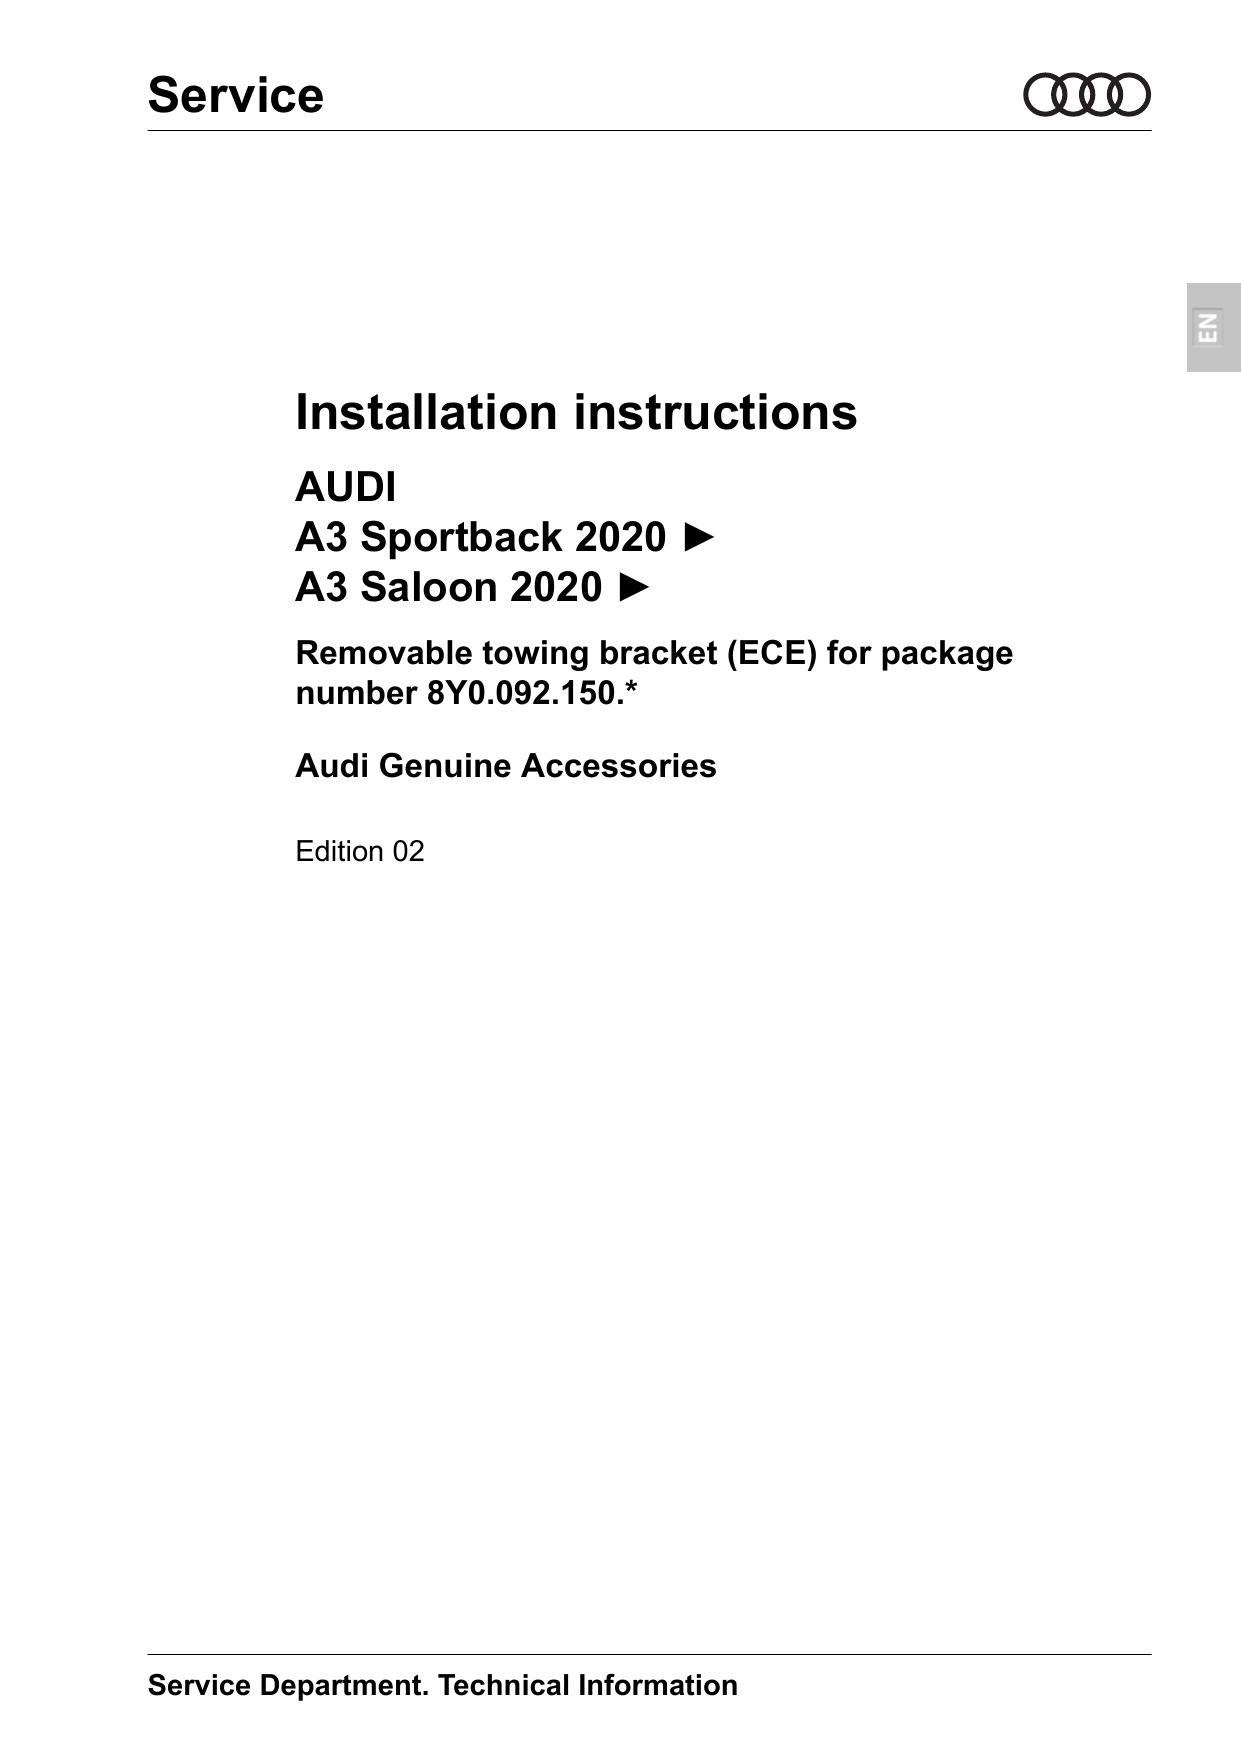 installation-instructions-audi-a3-sportback-2020-a3-saloon-2020-removable-towing-bracket-ece-for-package-number-8y0092150.pdf